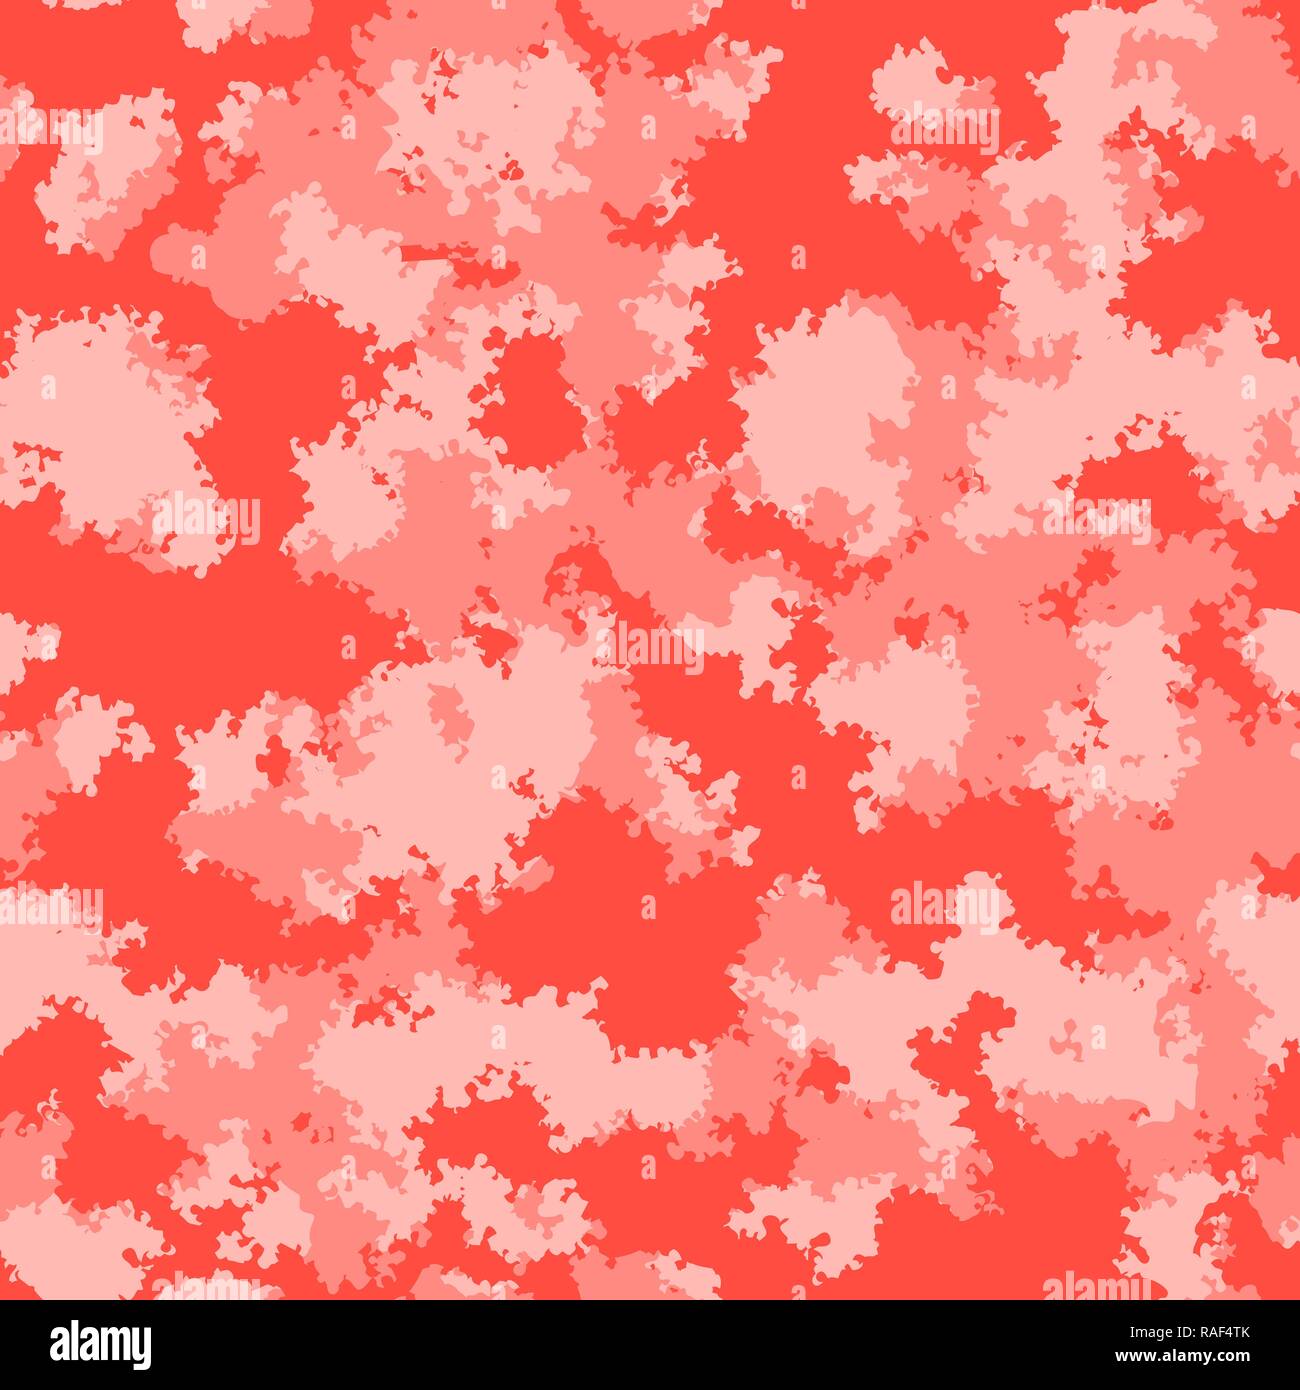 Fashion camo surface design. Digital tile camouflage pattern. Living coral marble color clouds seamless fabric texture Trendy camouflage salmon red te Stock Vector